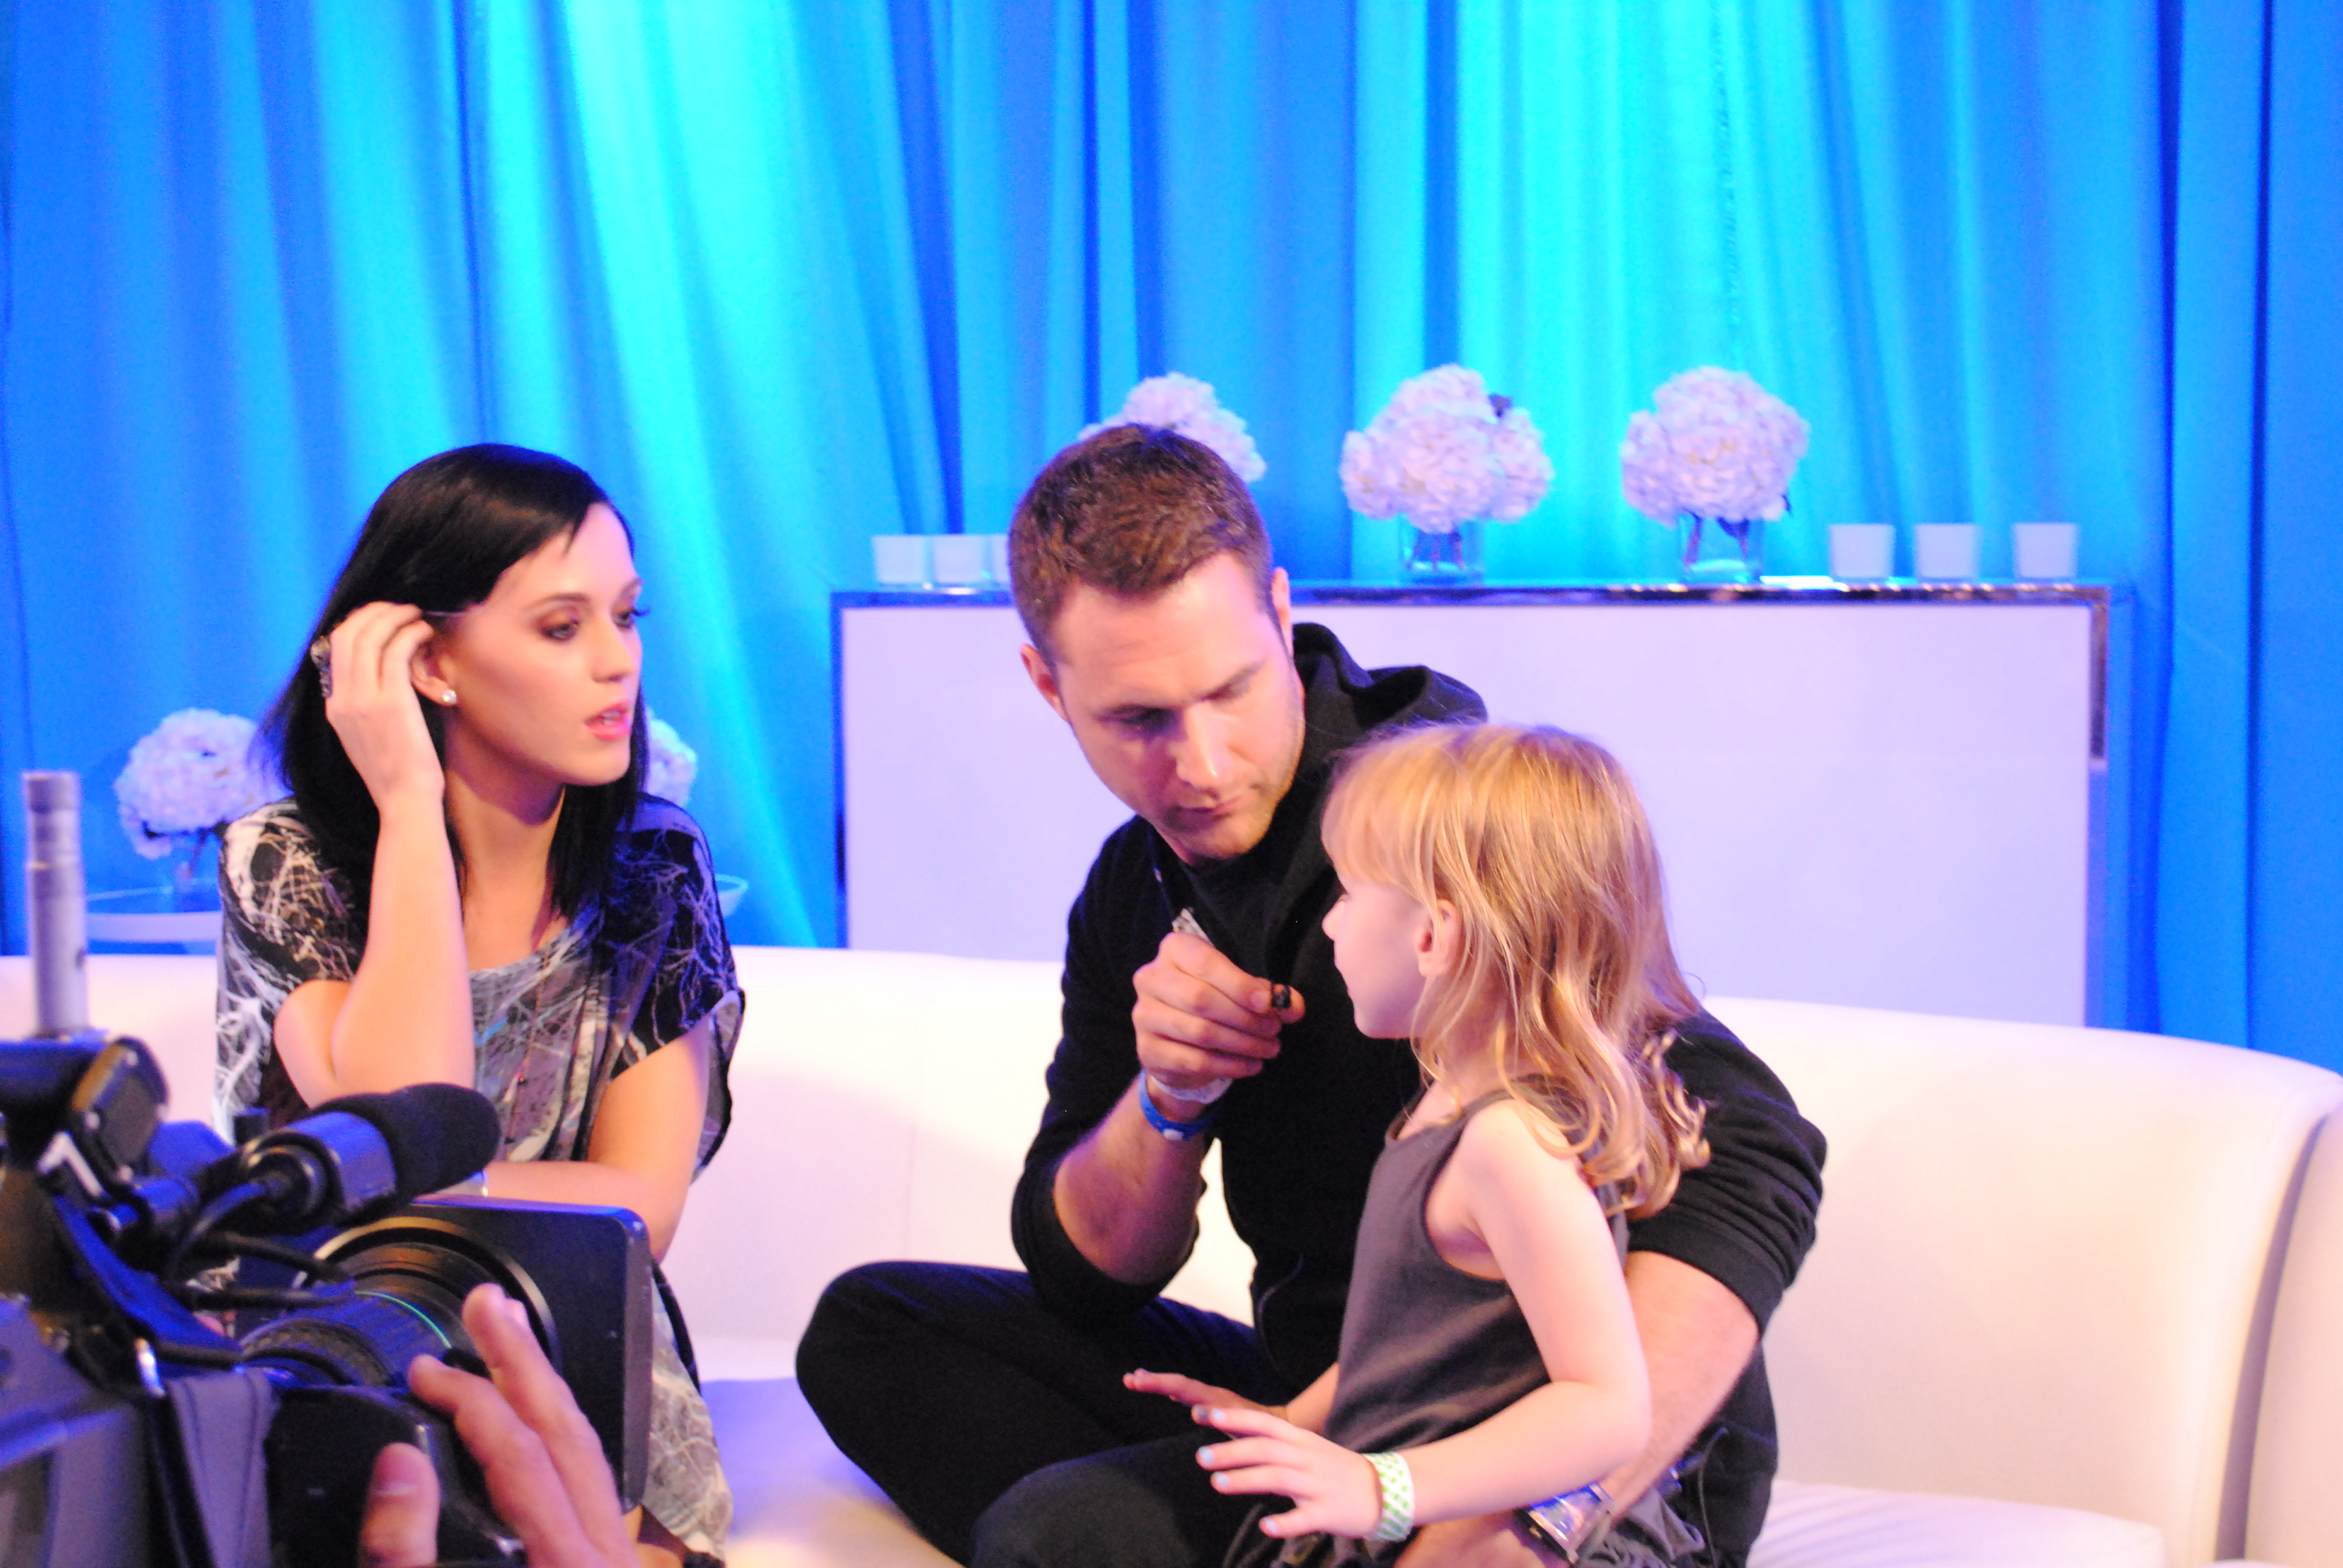 Sofia and Matt Wells interviewing Katy Perry at the Much Music Video Awards-2011.